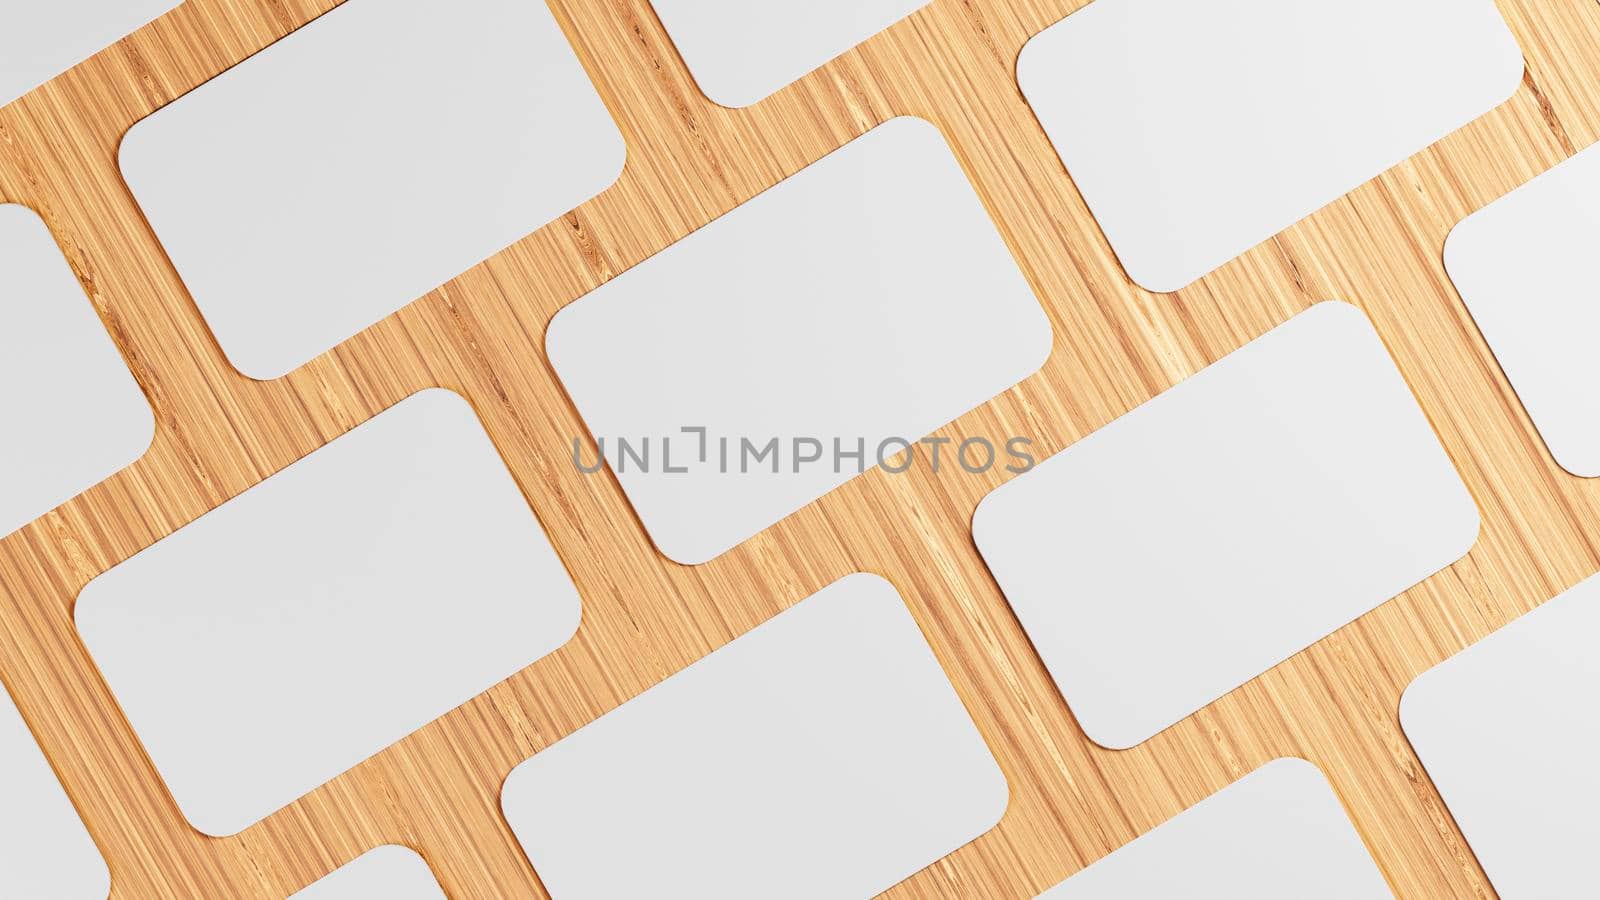 Stacks of white Business cards, 3d illustration by raferto1973